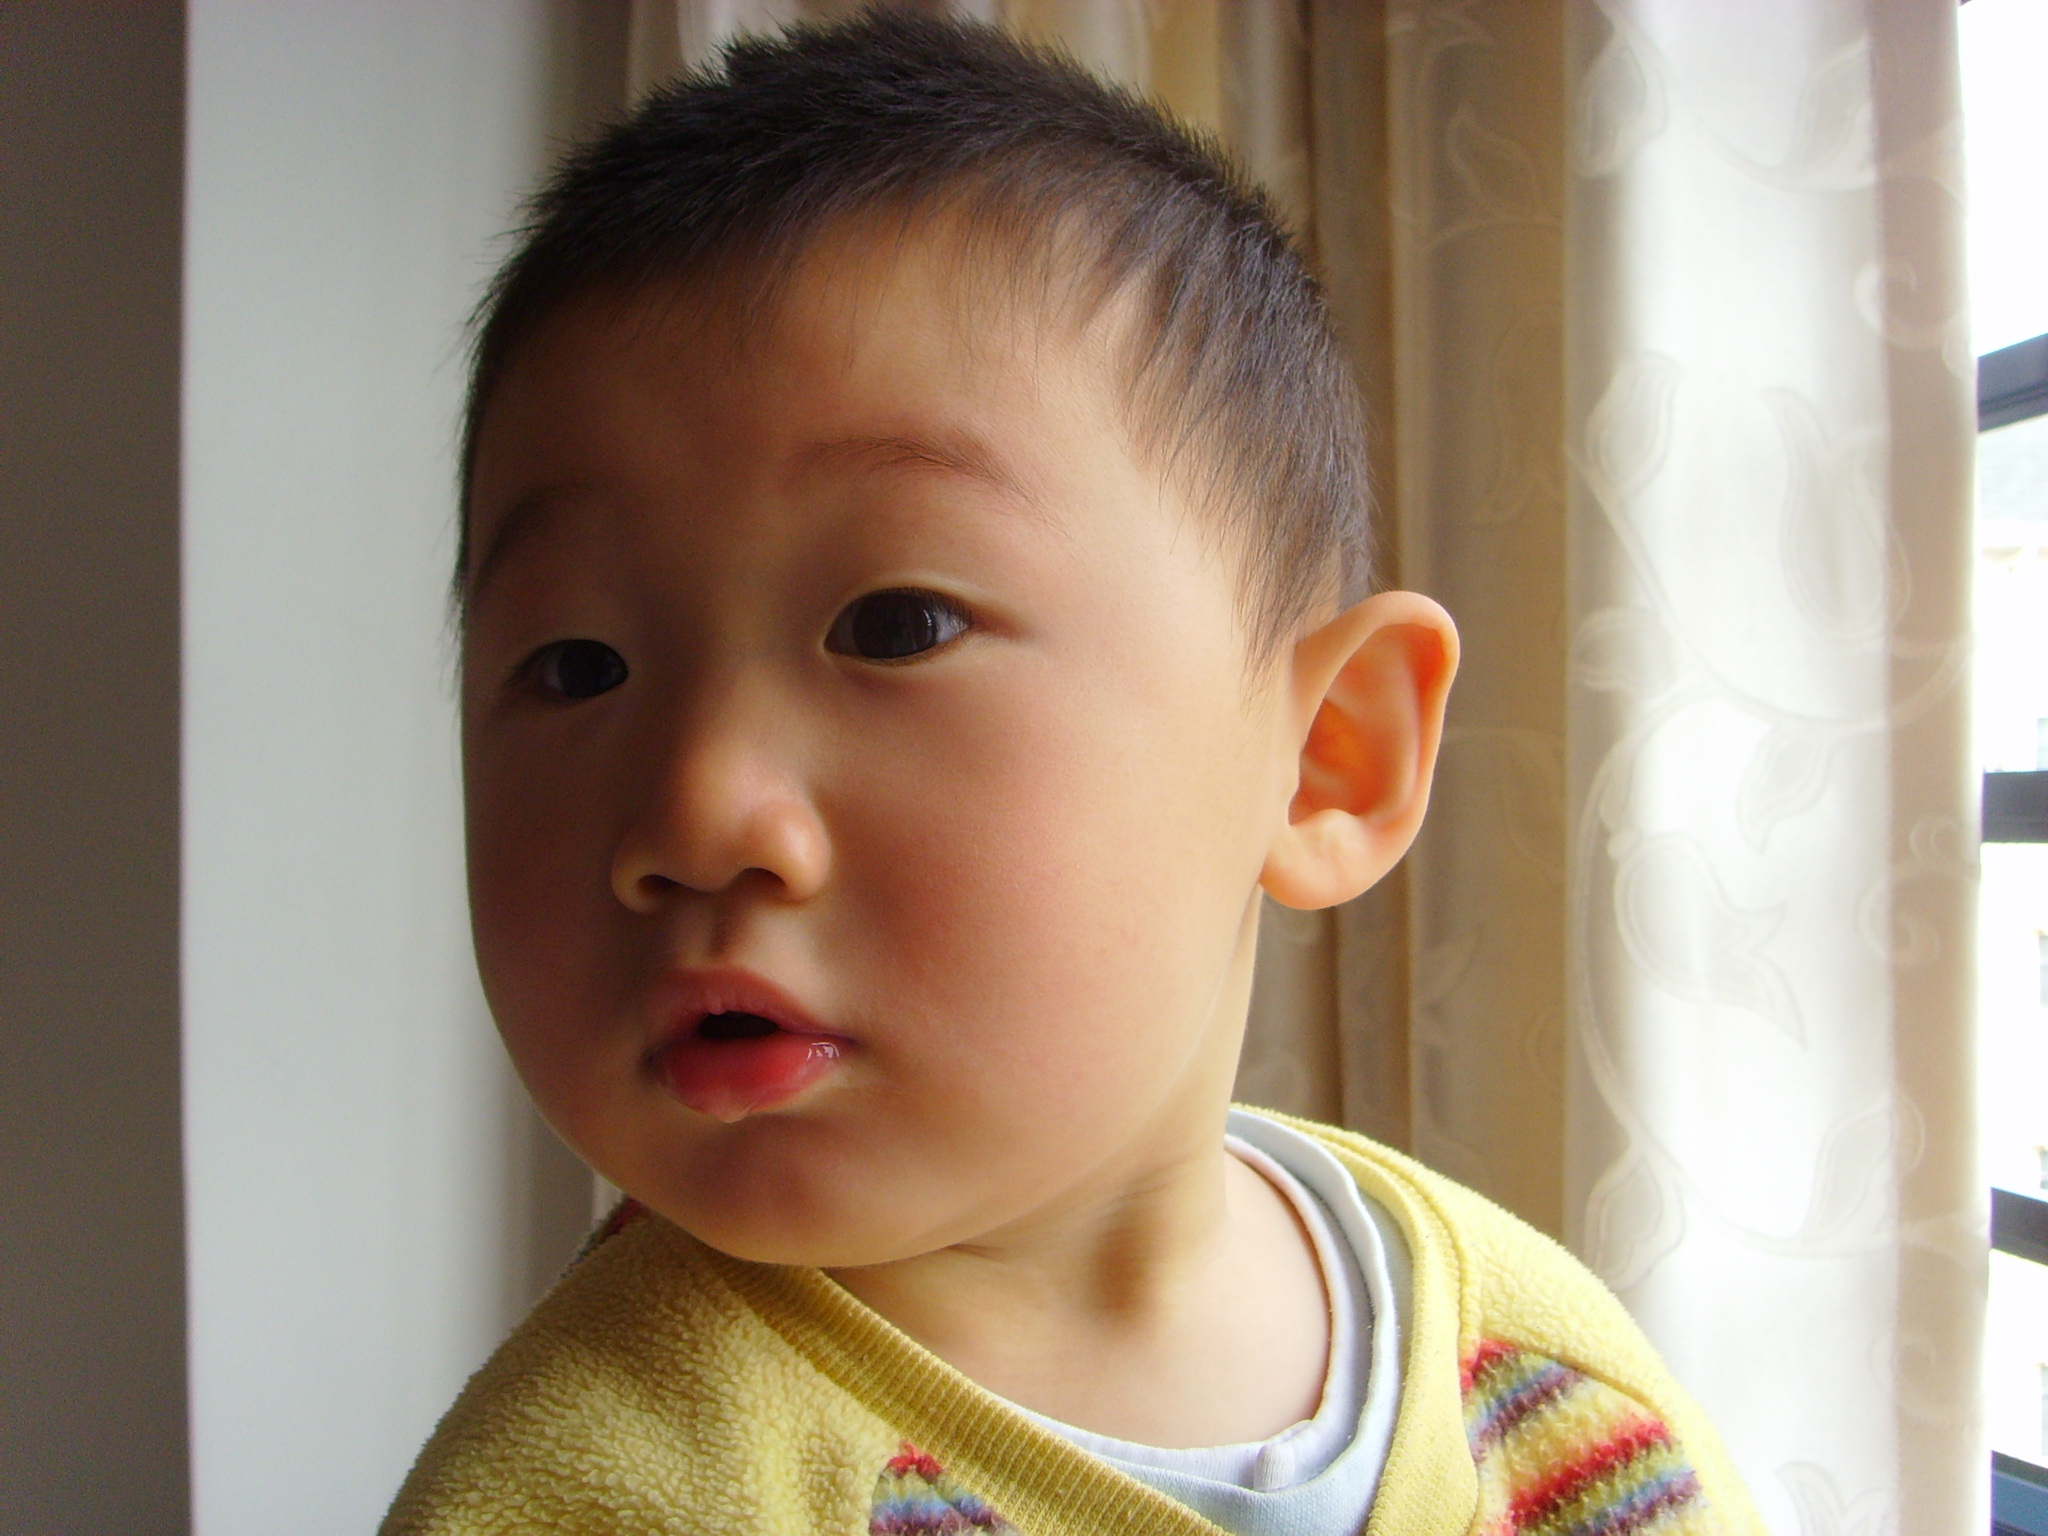 a young child wearing a yellow sweater is looking away from the camera